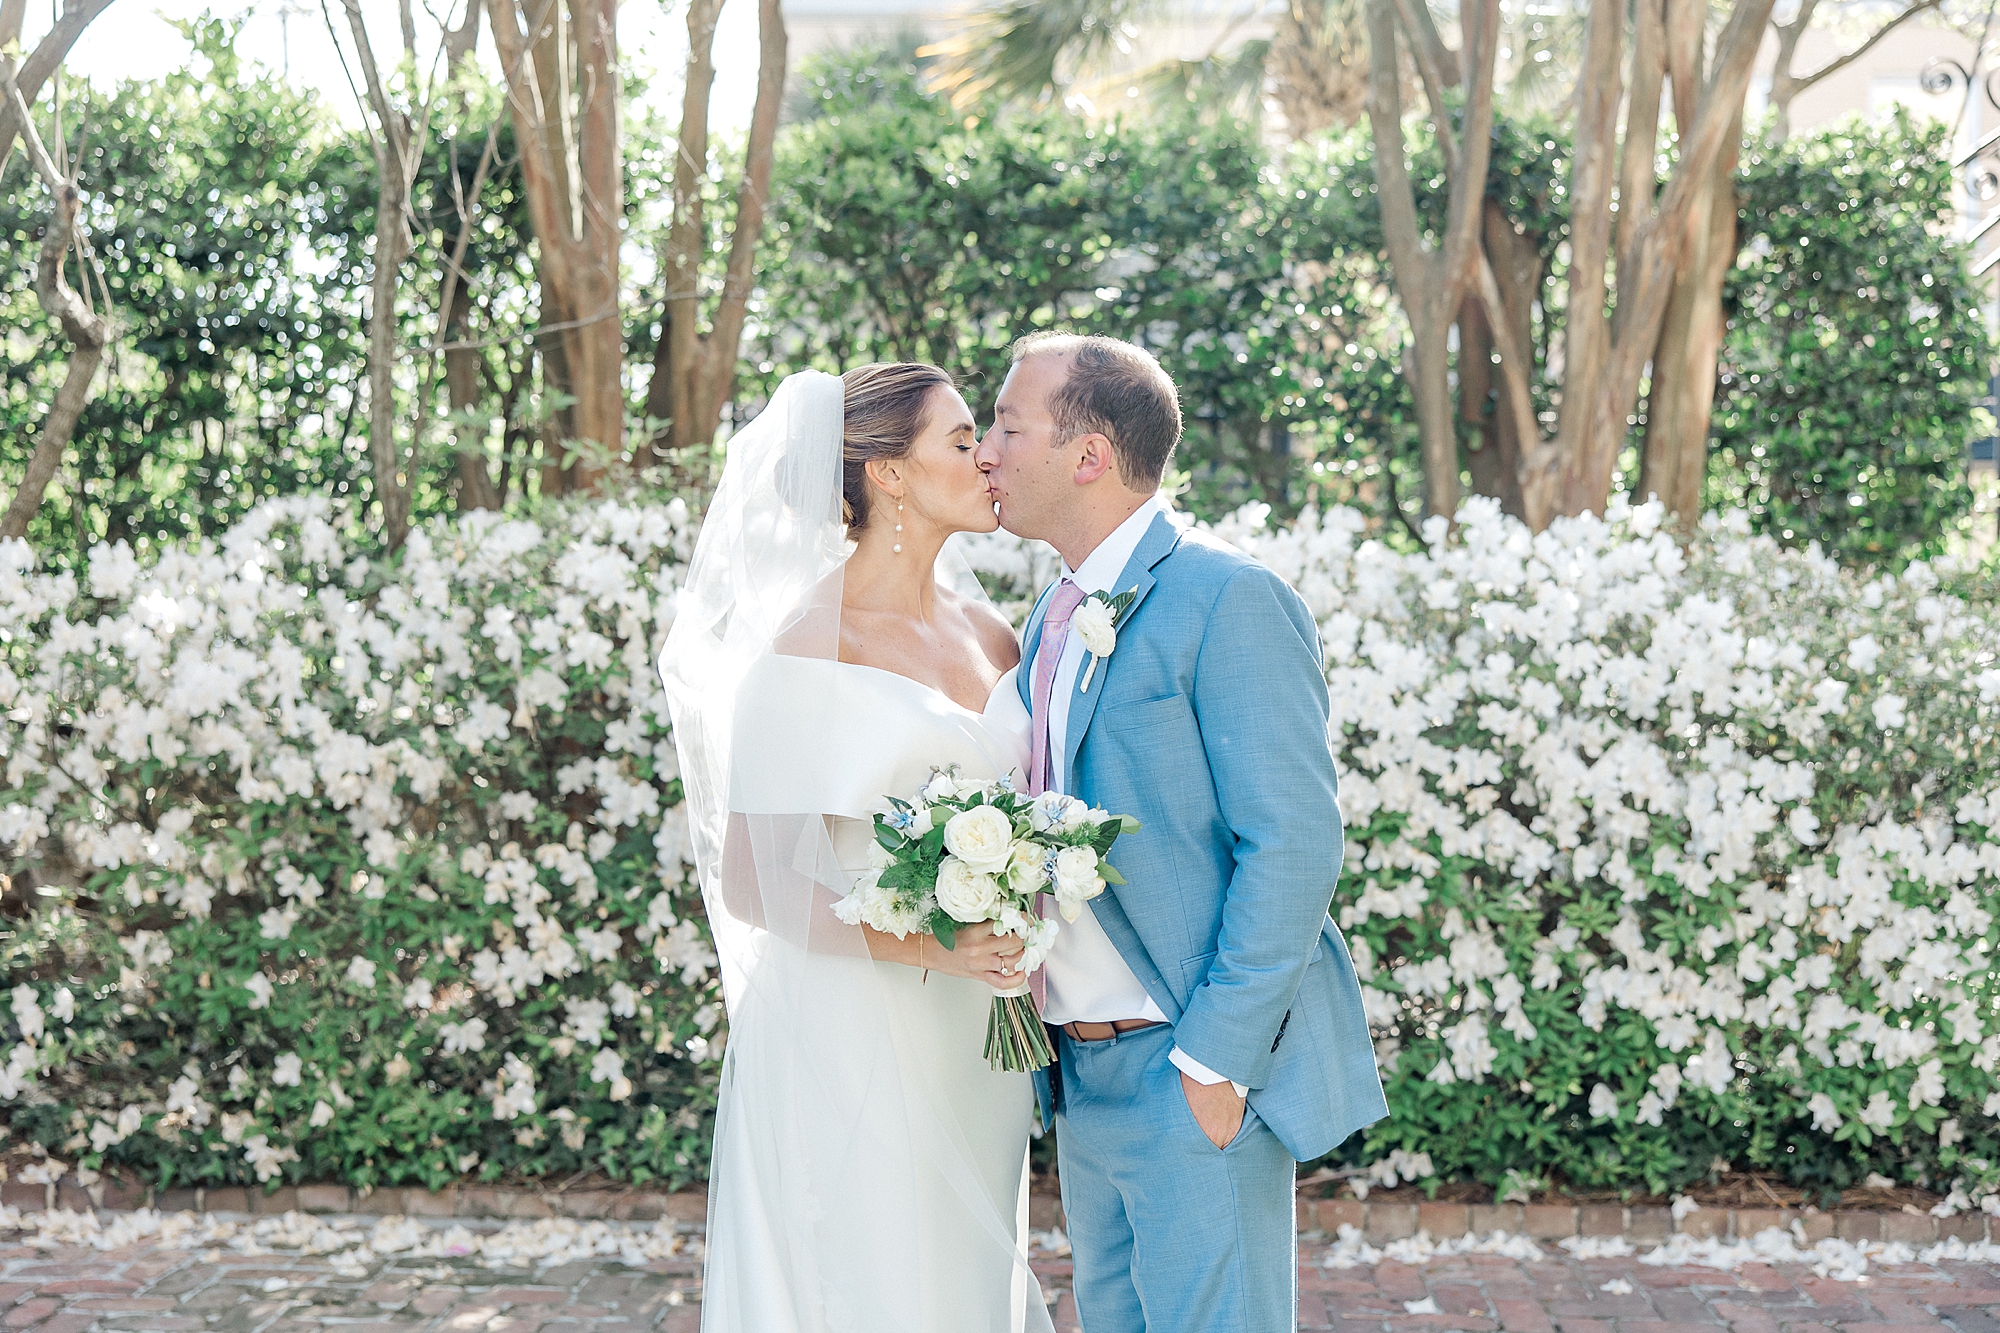 couple kiss in front of blooming bushes with white flowers